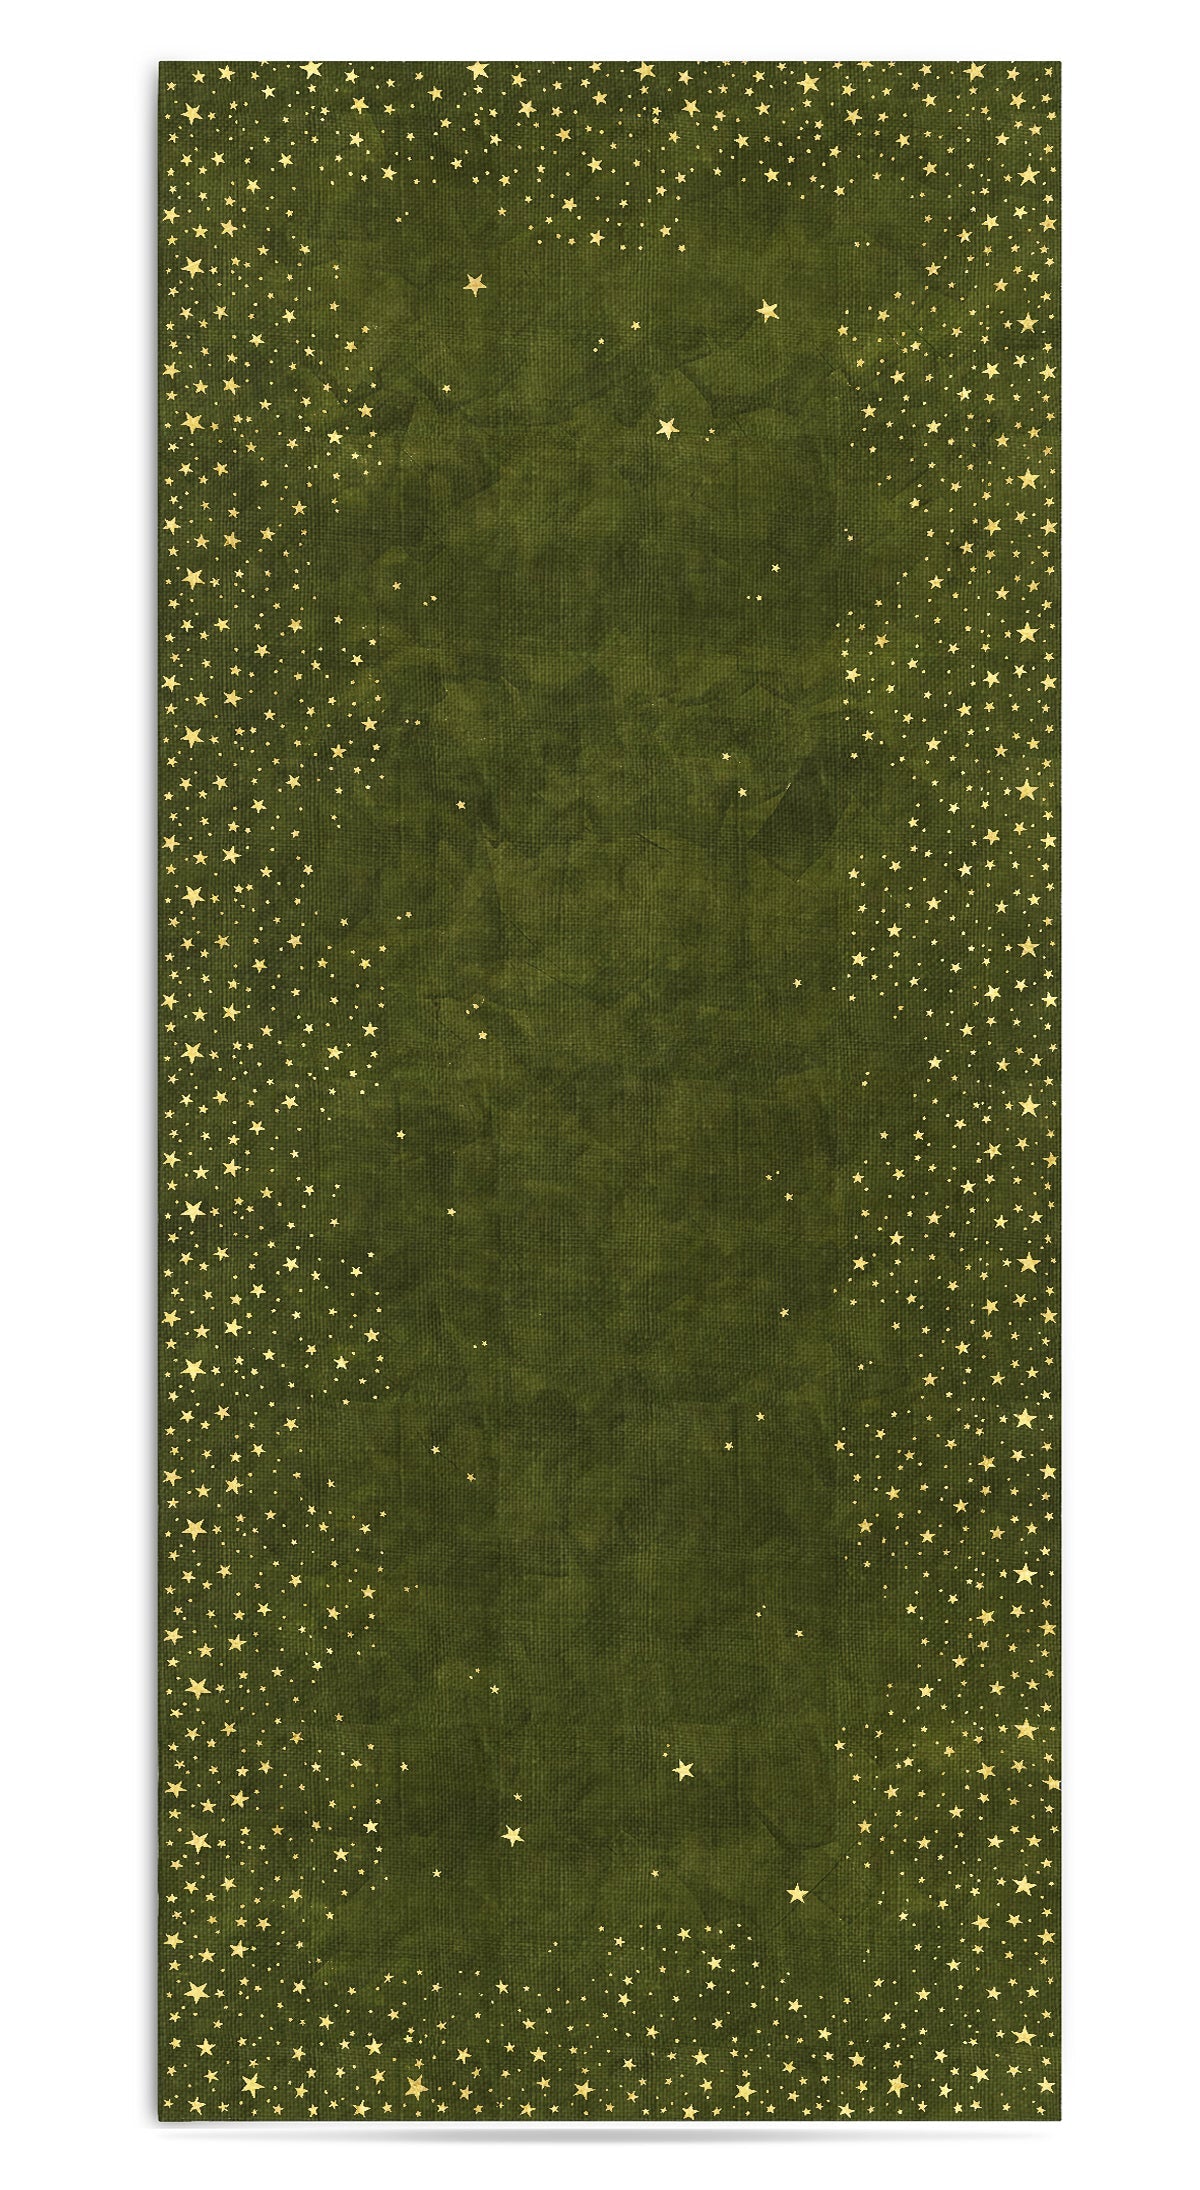 Falling Stars Linen Tablecloth in Avocado Green with Gold Stars